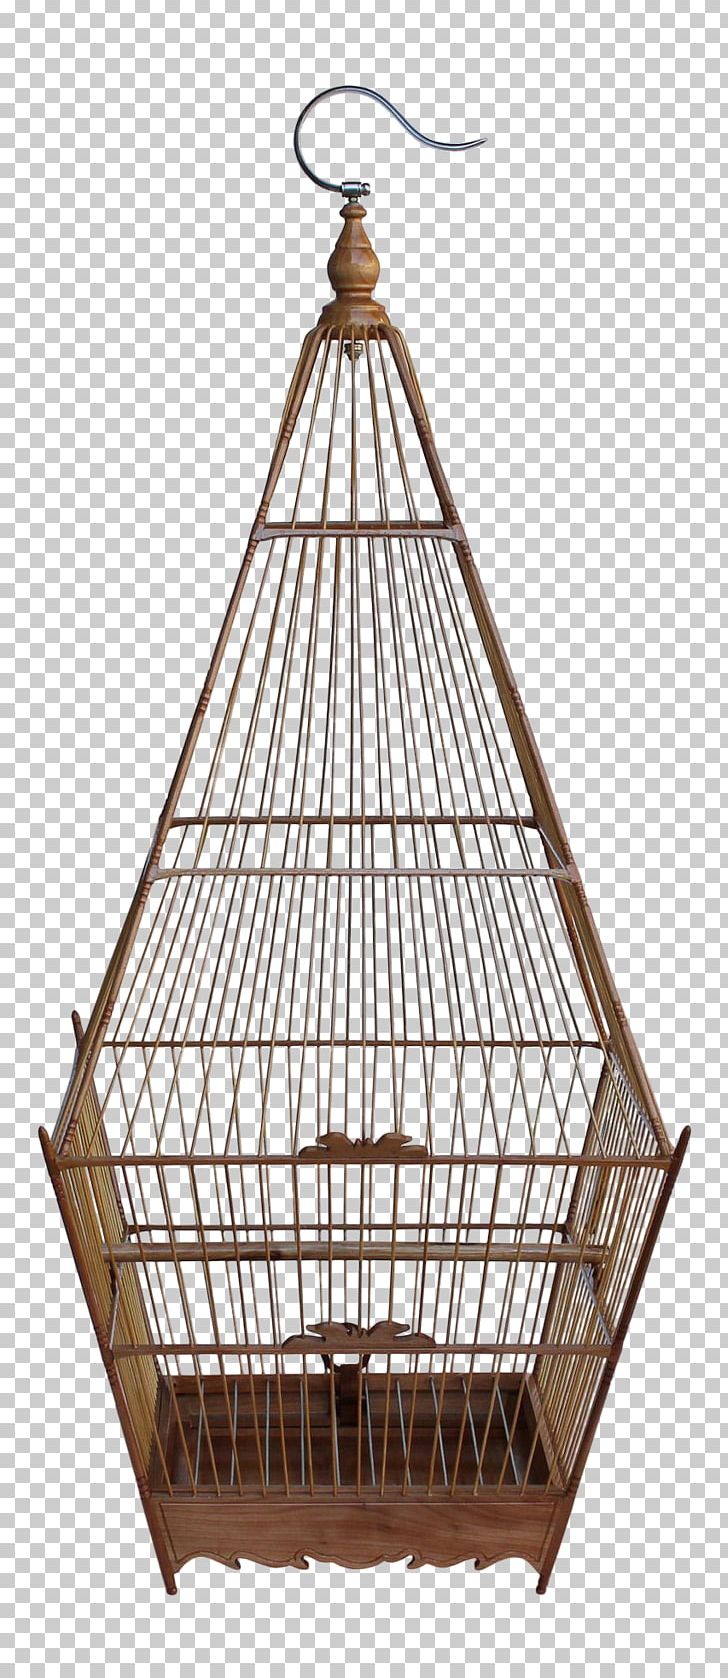 Birdcage Etsy Bamboo YouTube PNG, Clipart, Bamboo, Birdcage, Cage, Carving, Chinese Free PNG Download